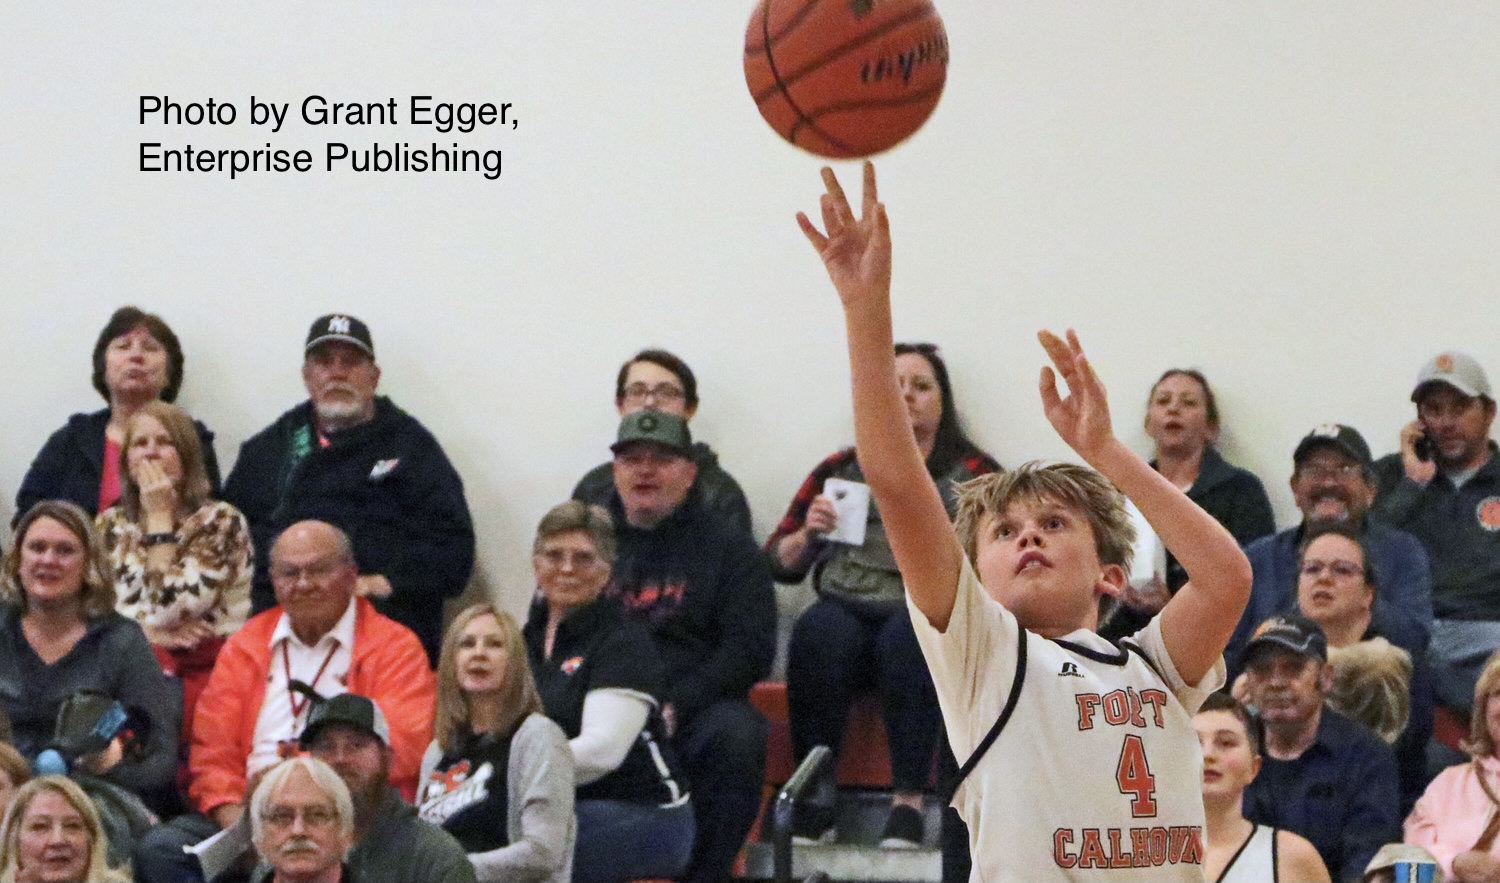 The Pioneers' Gage Beckenhauer puts up a shot Tuesday at Fort Calhoun High School.